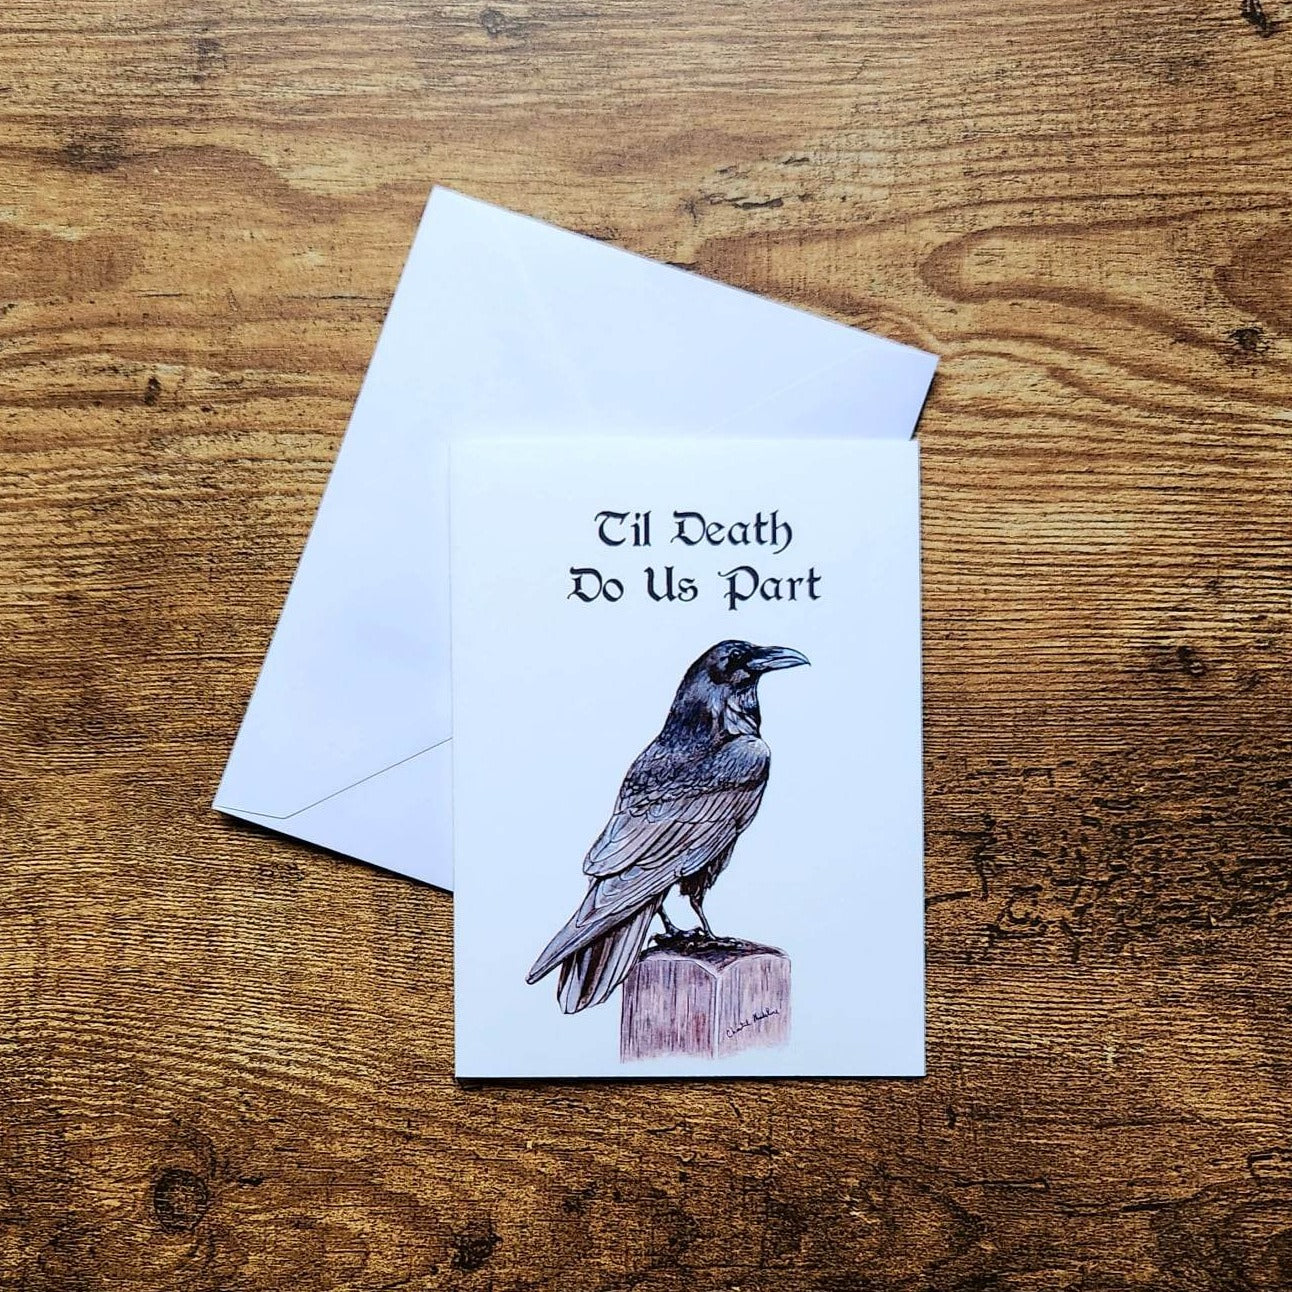 Til death do us part, Anniversary card, Card for husband, Card for wife, Goth wedding card, Halloween love card, Engagement card, Raven card